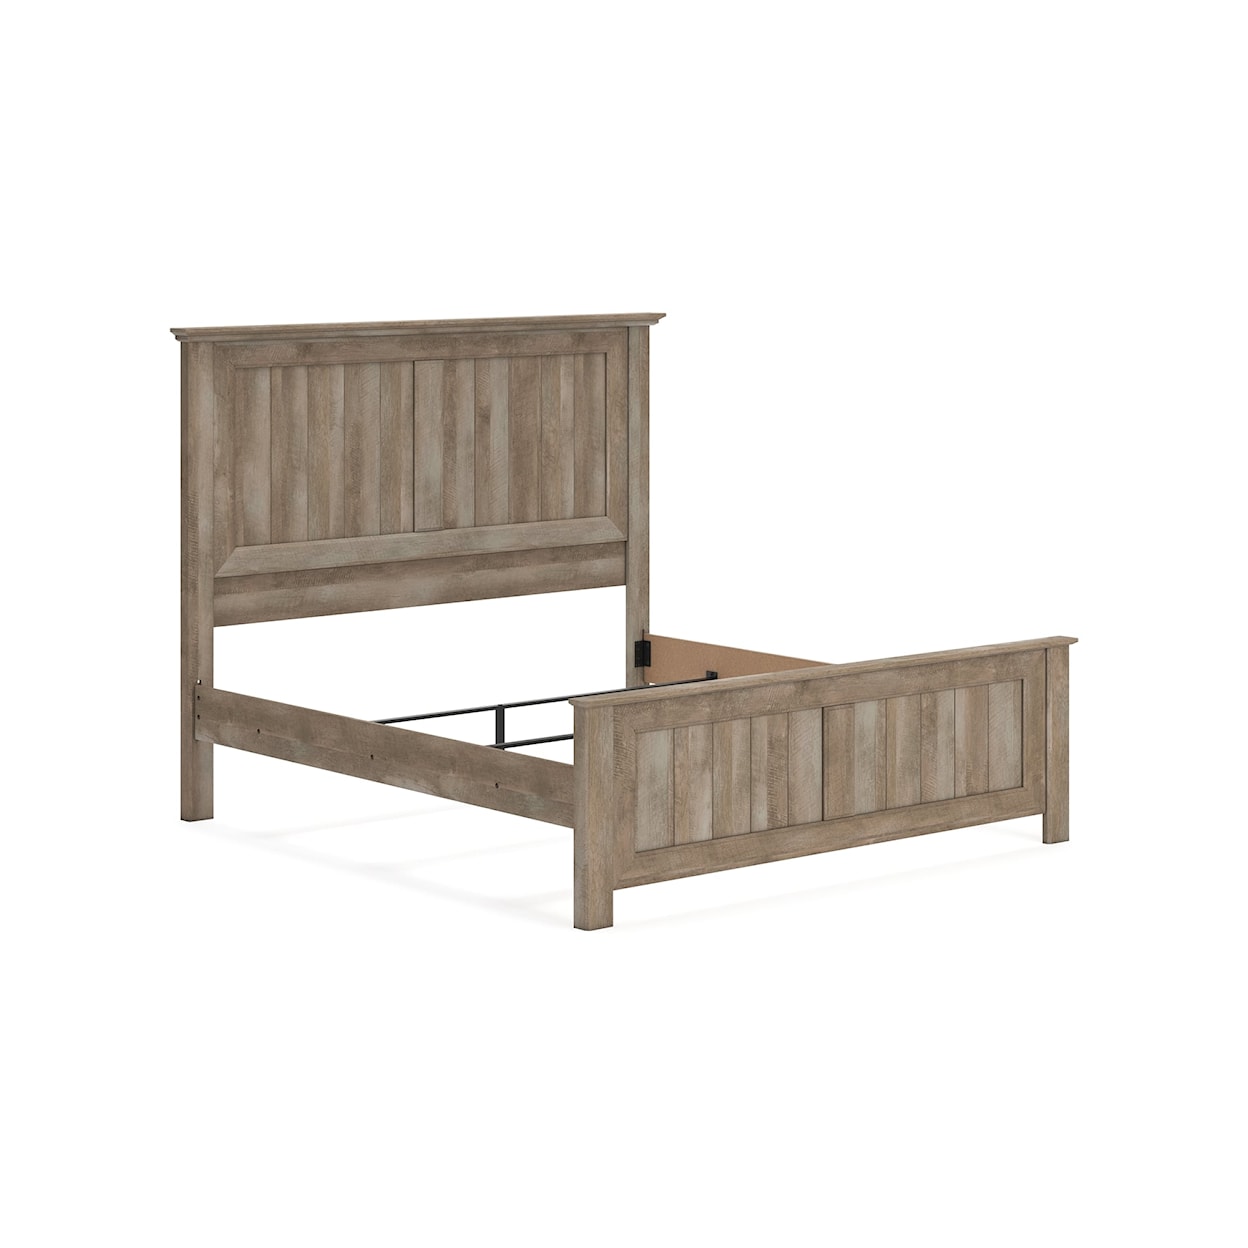 Signature Design by Ashley Yarbeck King Panel Bed